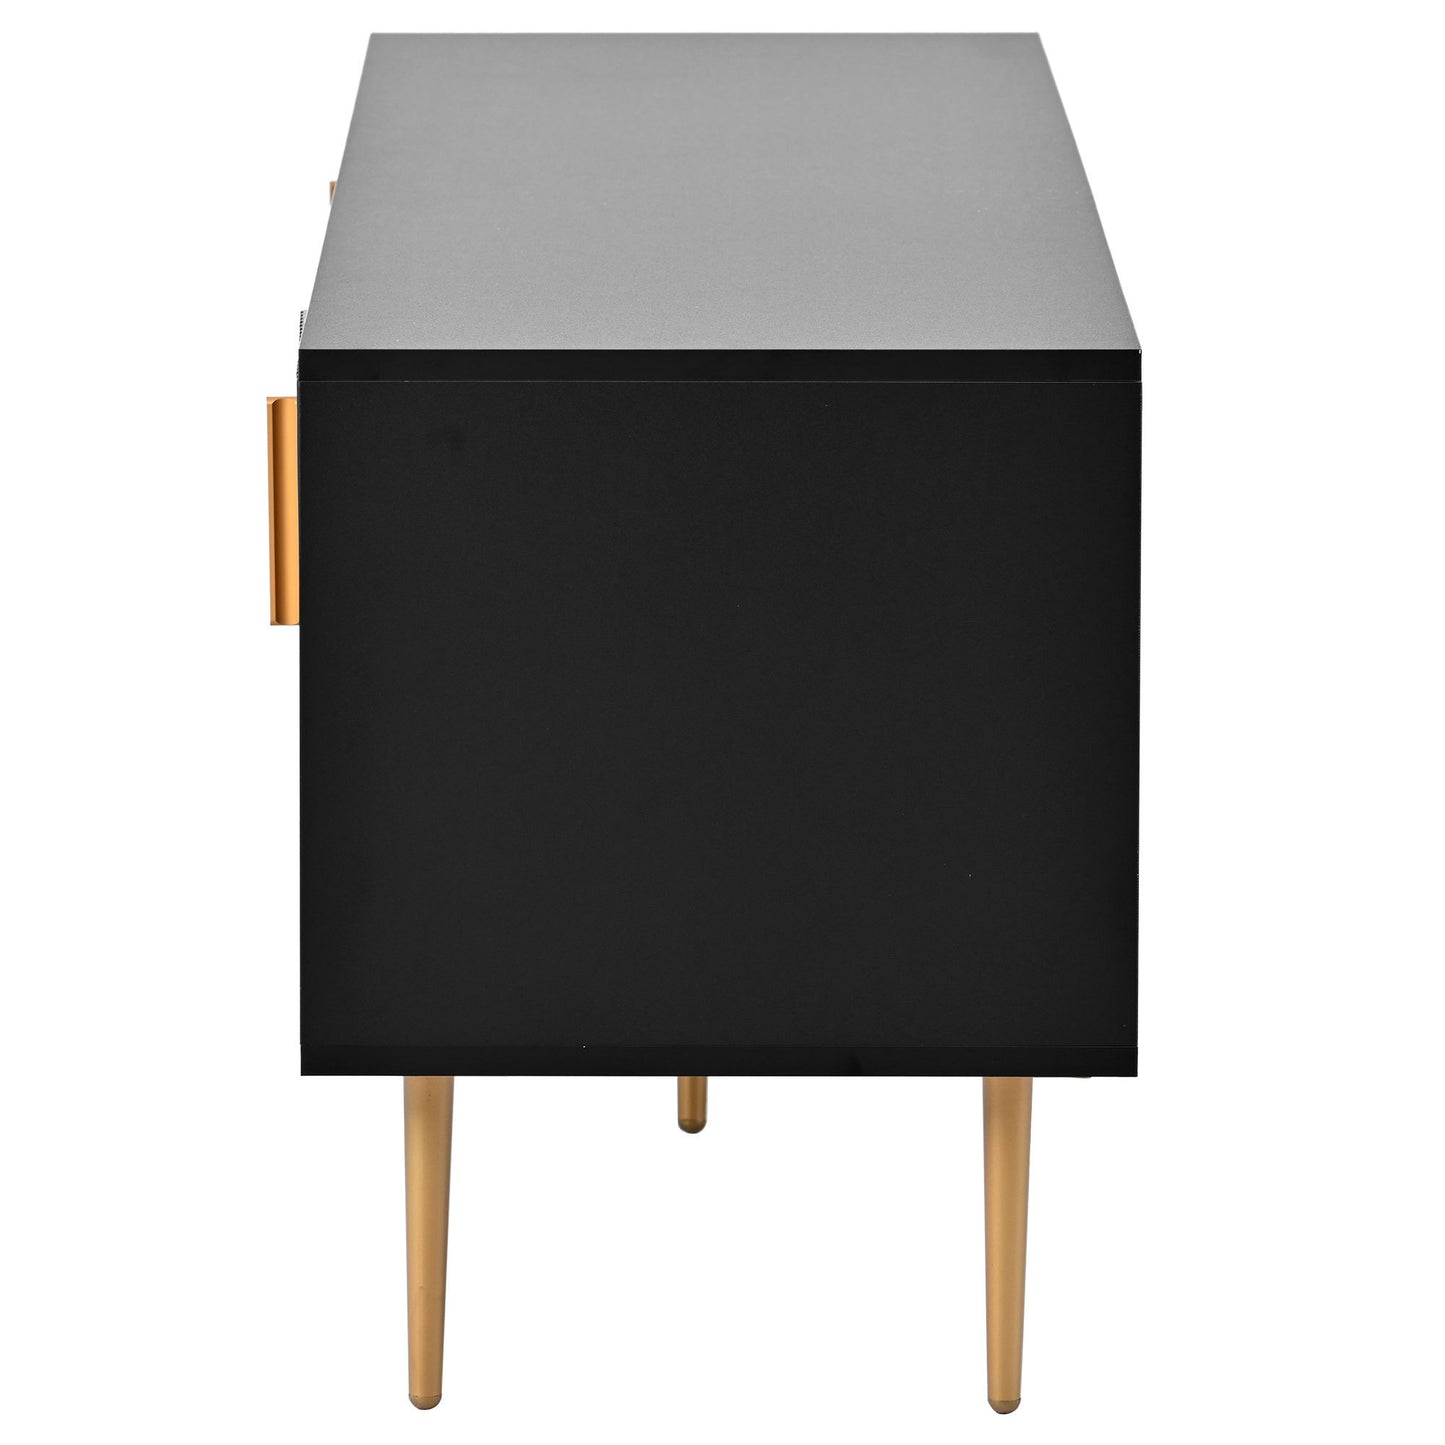 Modern Black and Champagne TV Stand (For TV's up to 75'')